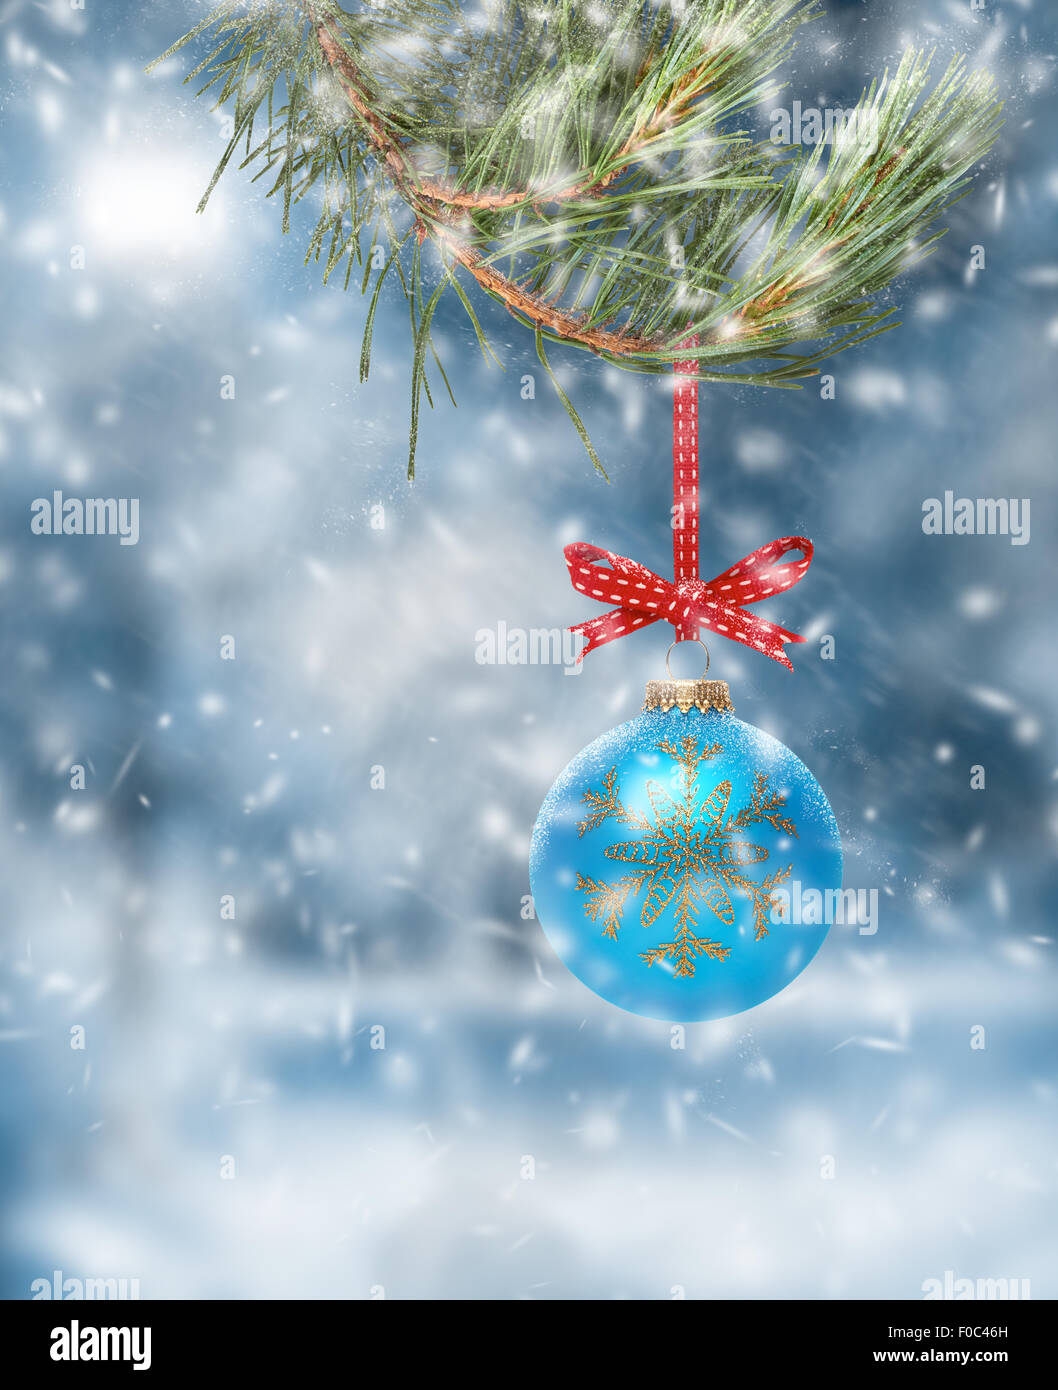 Traditional Christmas Tree Decoration hanging from a tree branch with a snow scene background. Stock Photo